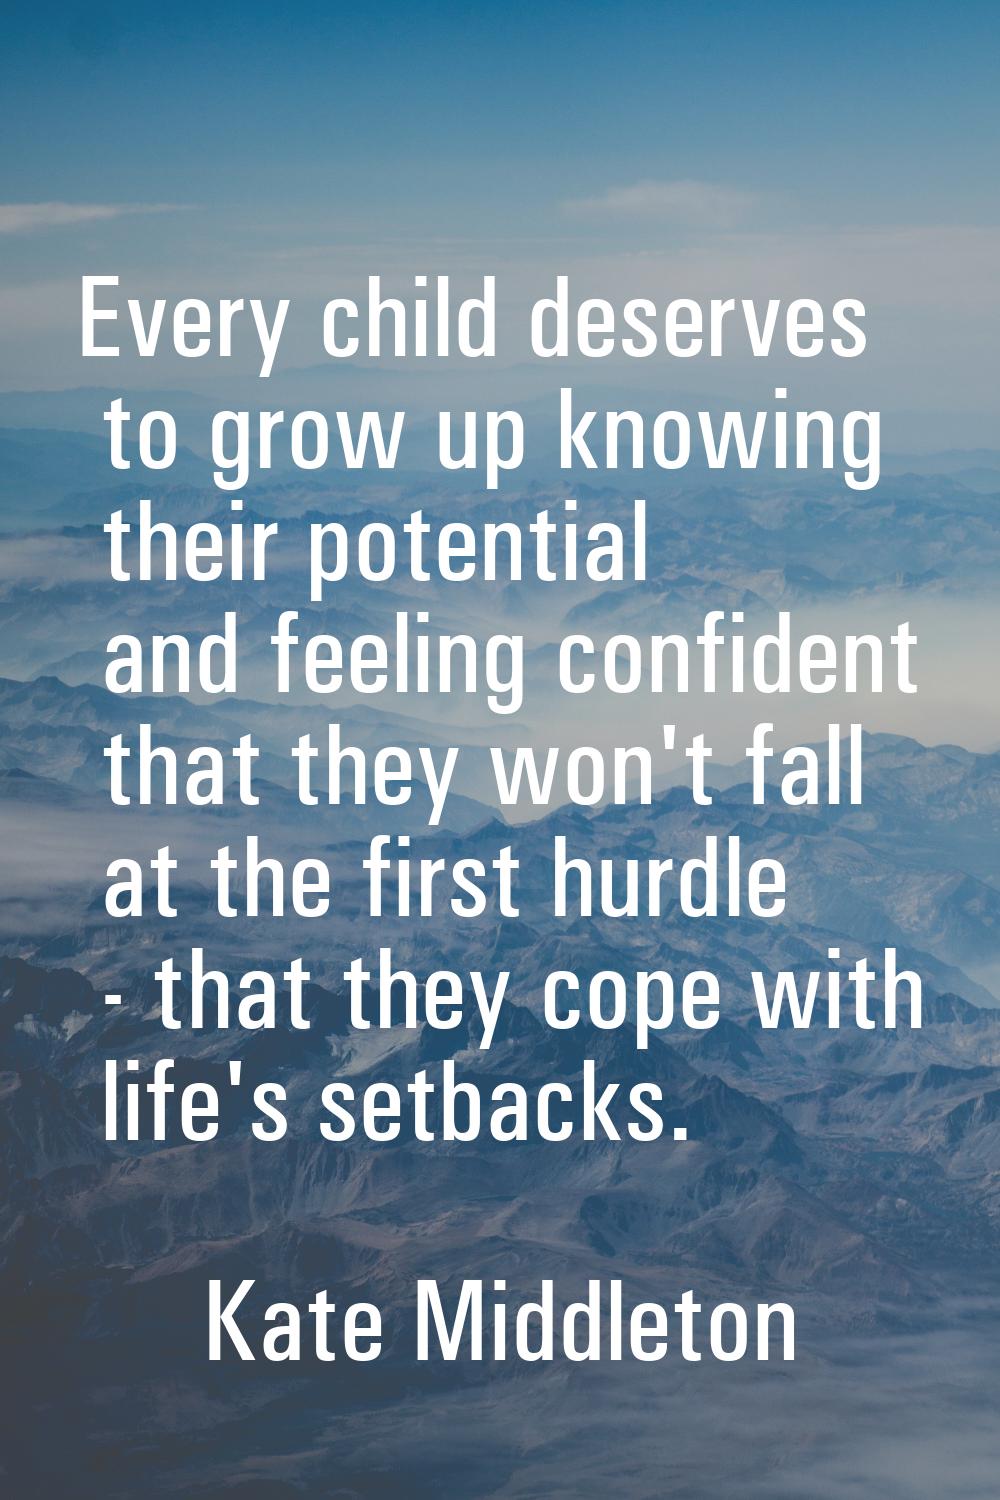 Every child deserves to grow up knowing their potential and feeling confident that they won't fall 